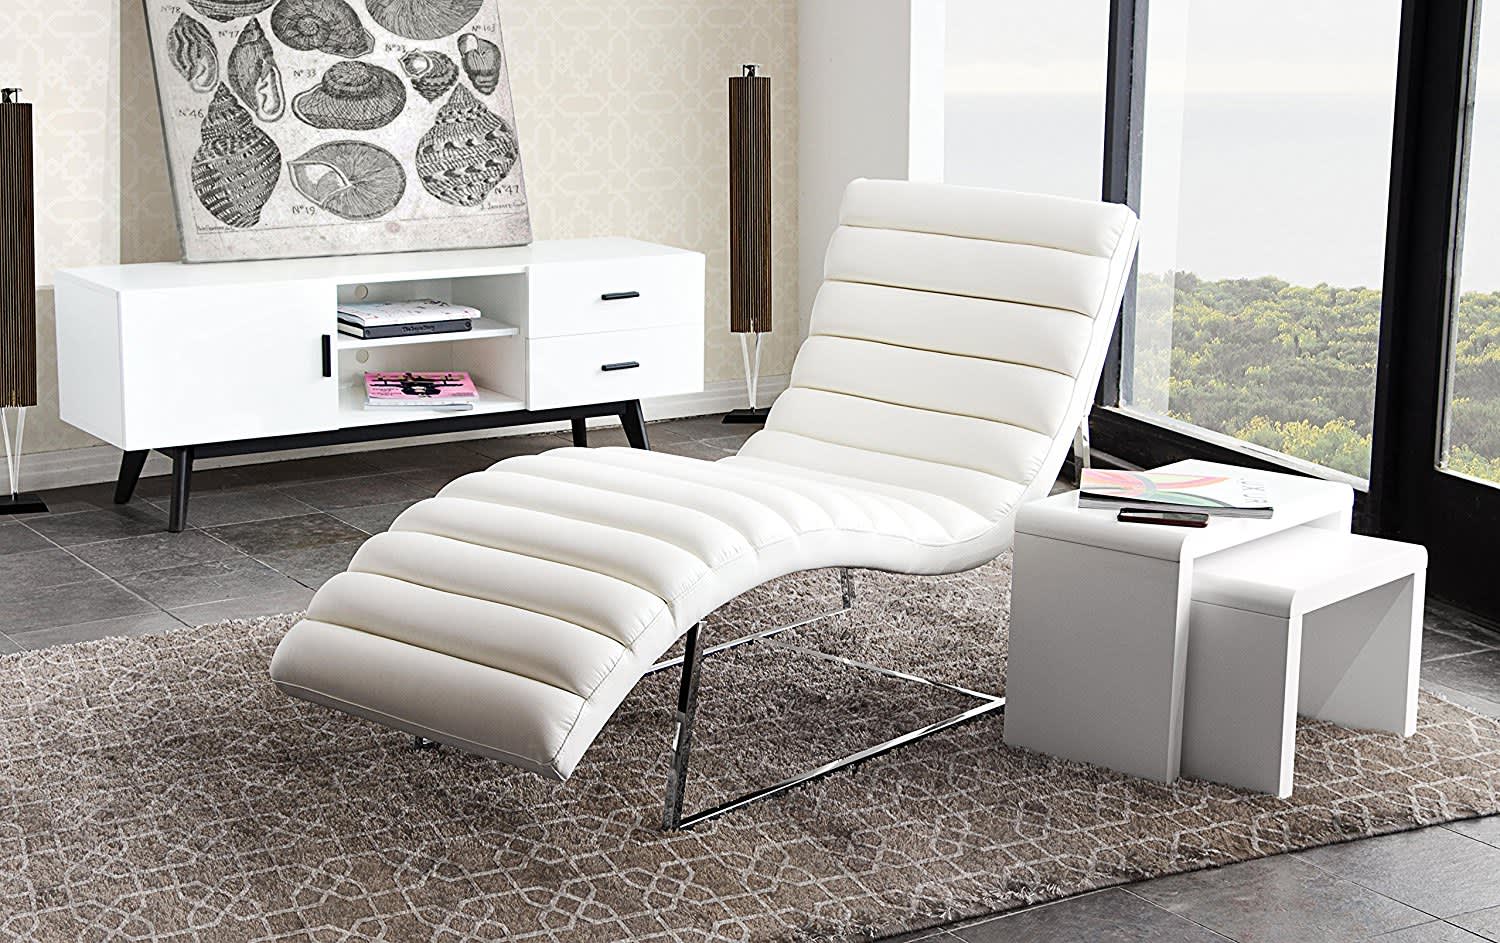 Chaise Lounge Chairs For Living Room